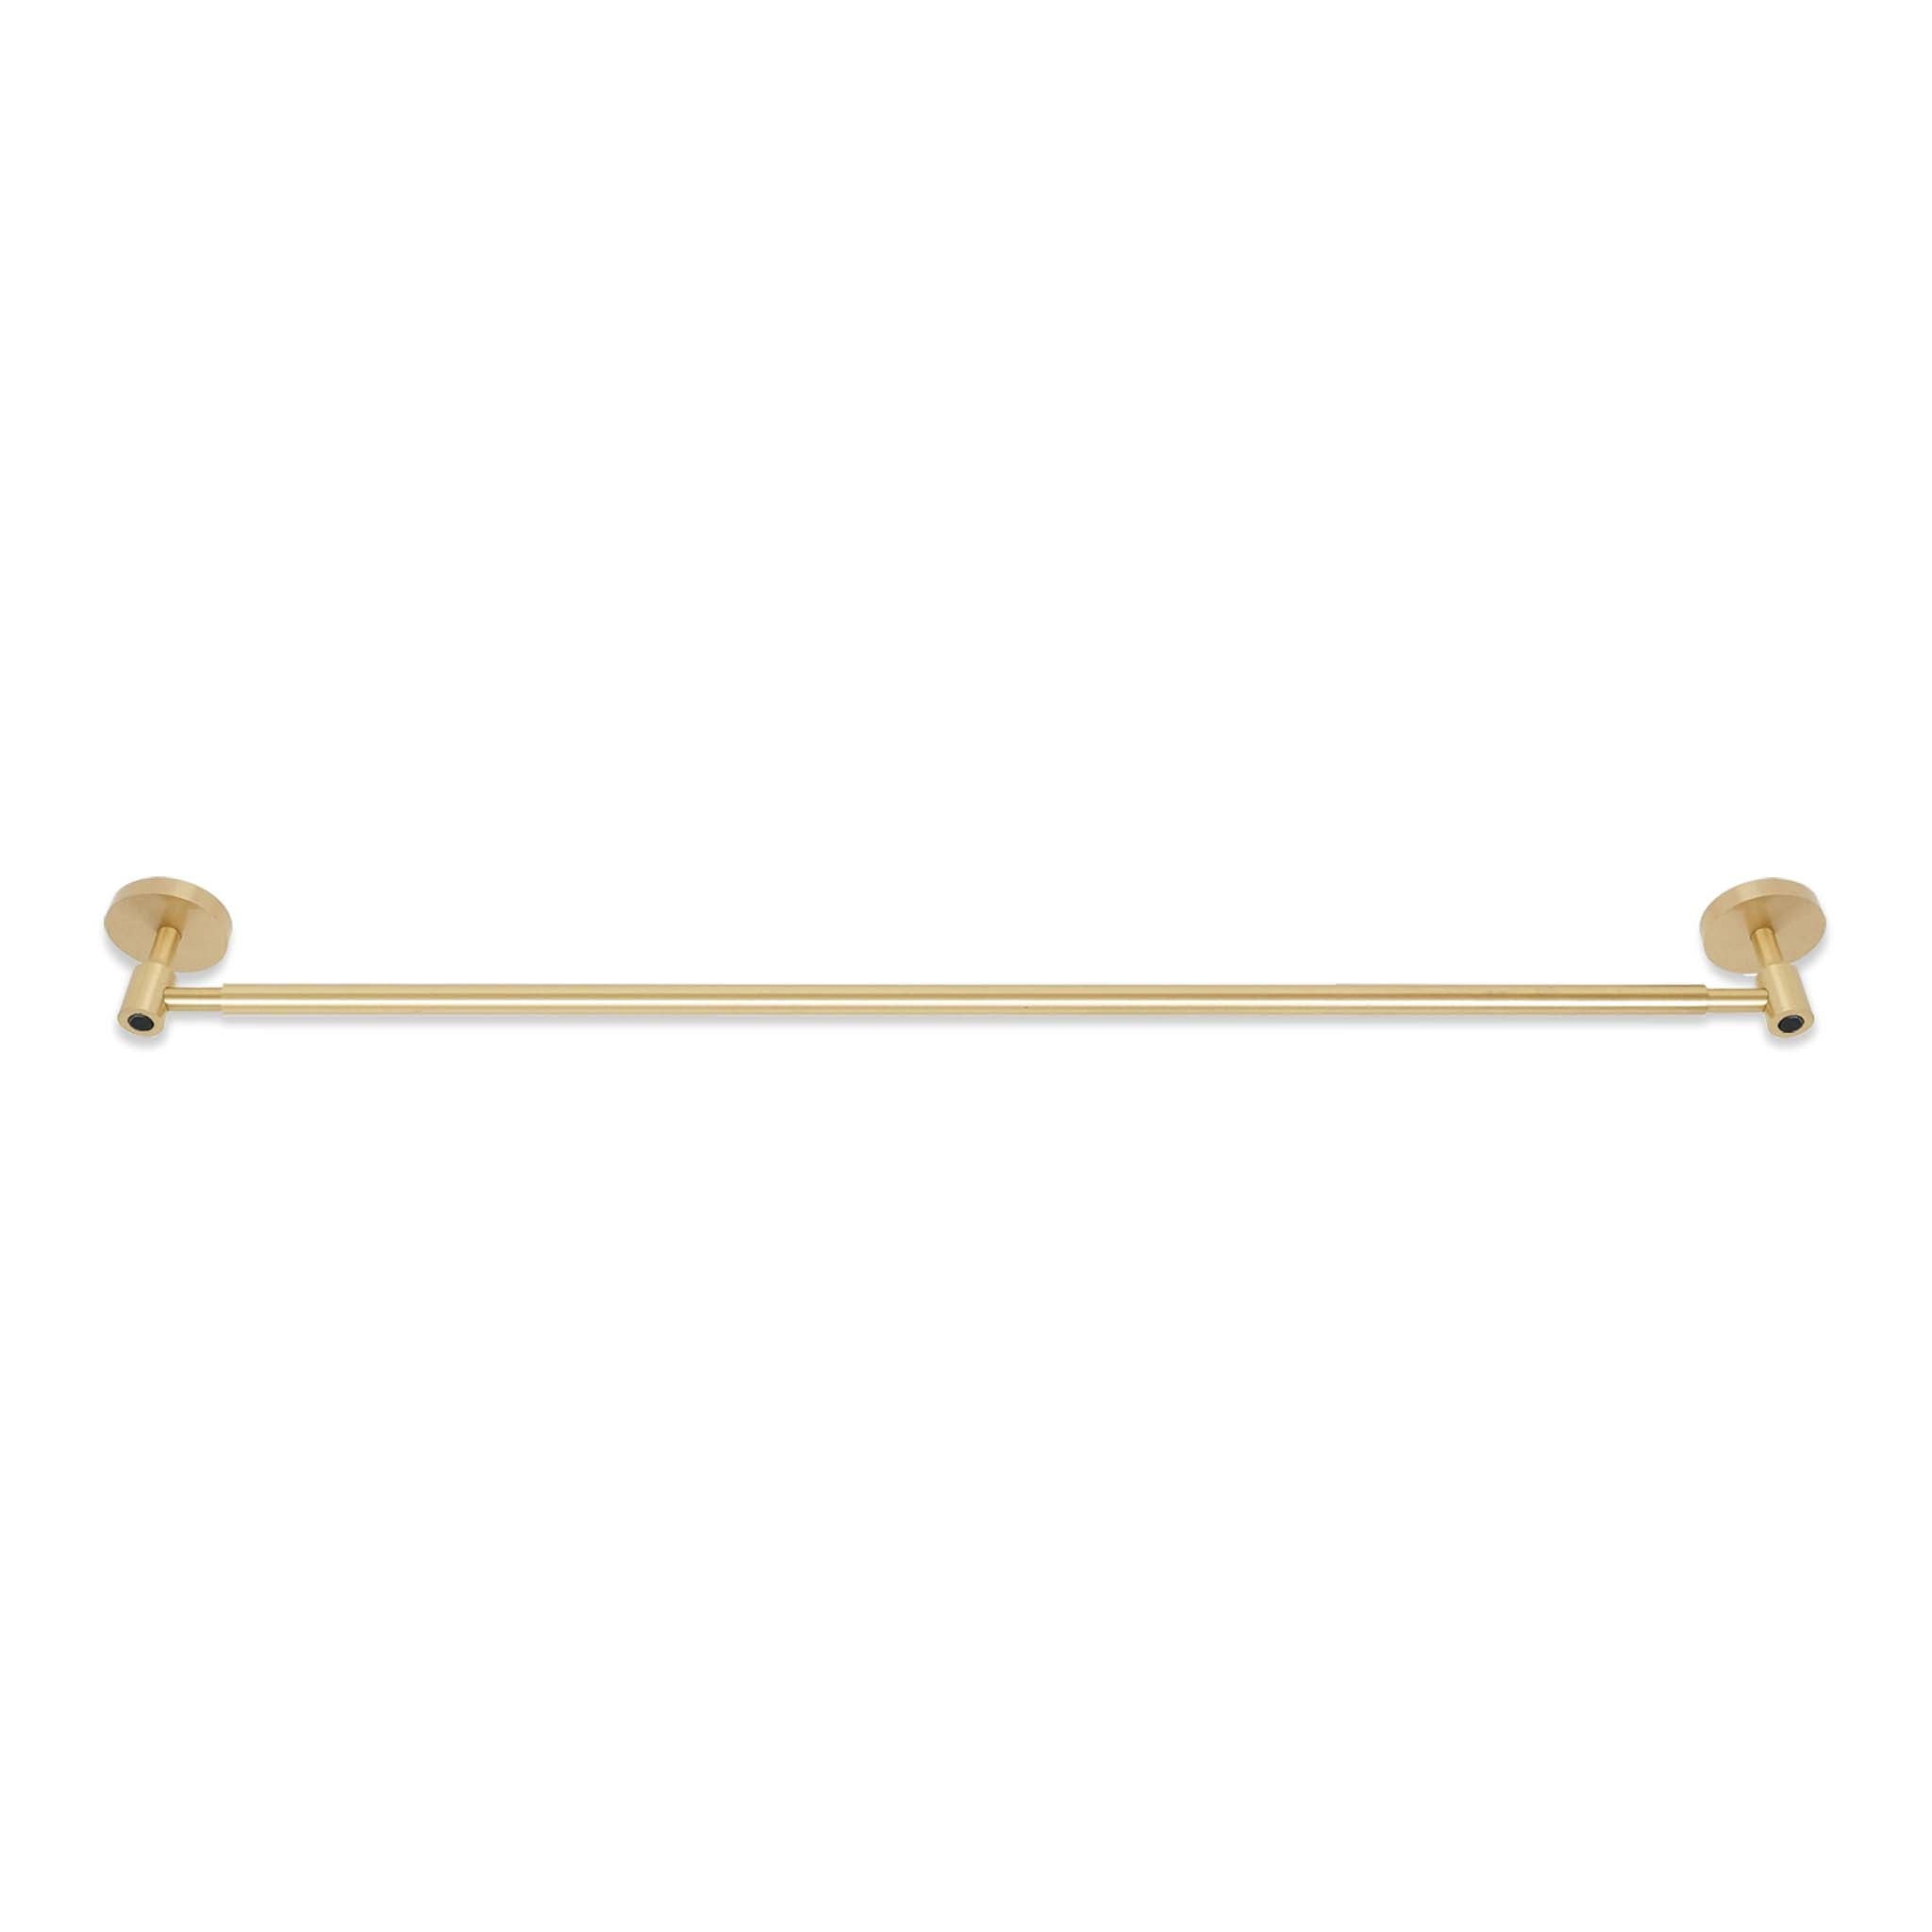 Brass and black color Head towel bar 24" Dutton Brown hardware